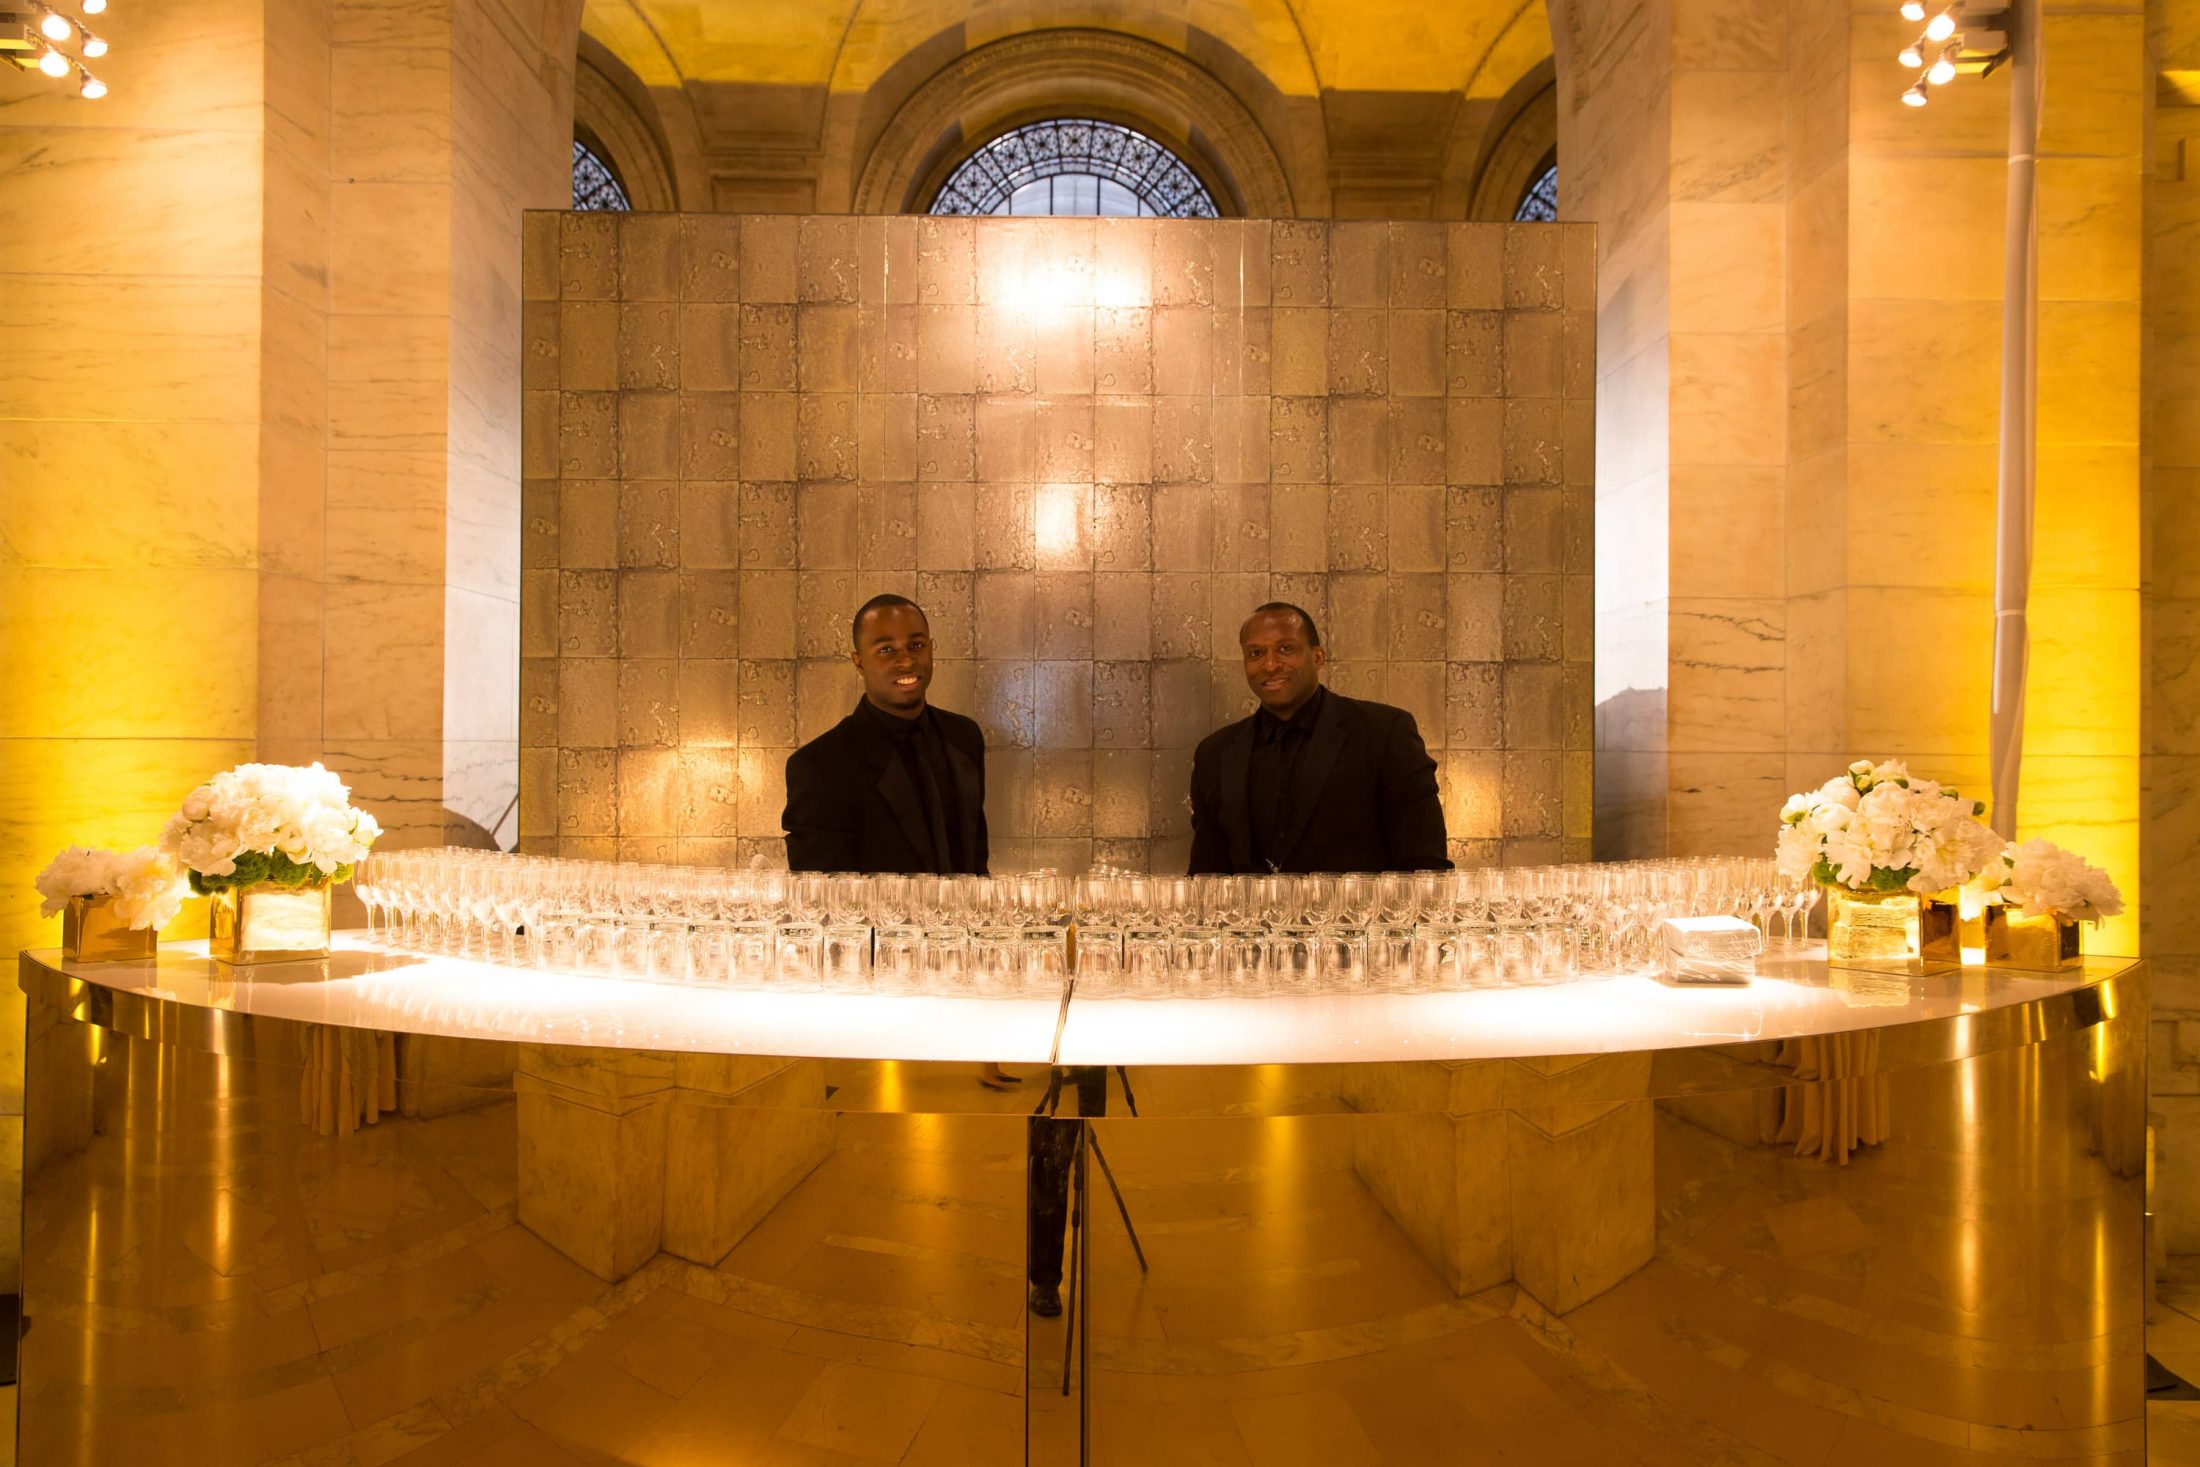 The gold bar at this New York Public Library wedding | Photo by Genevieve de Manio